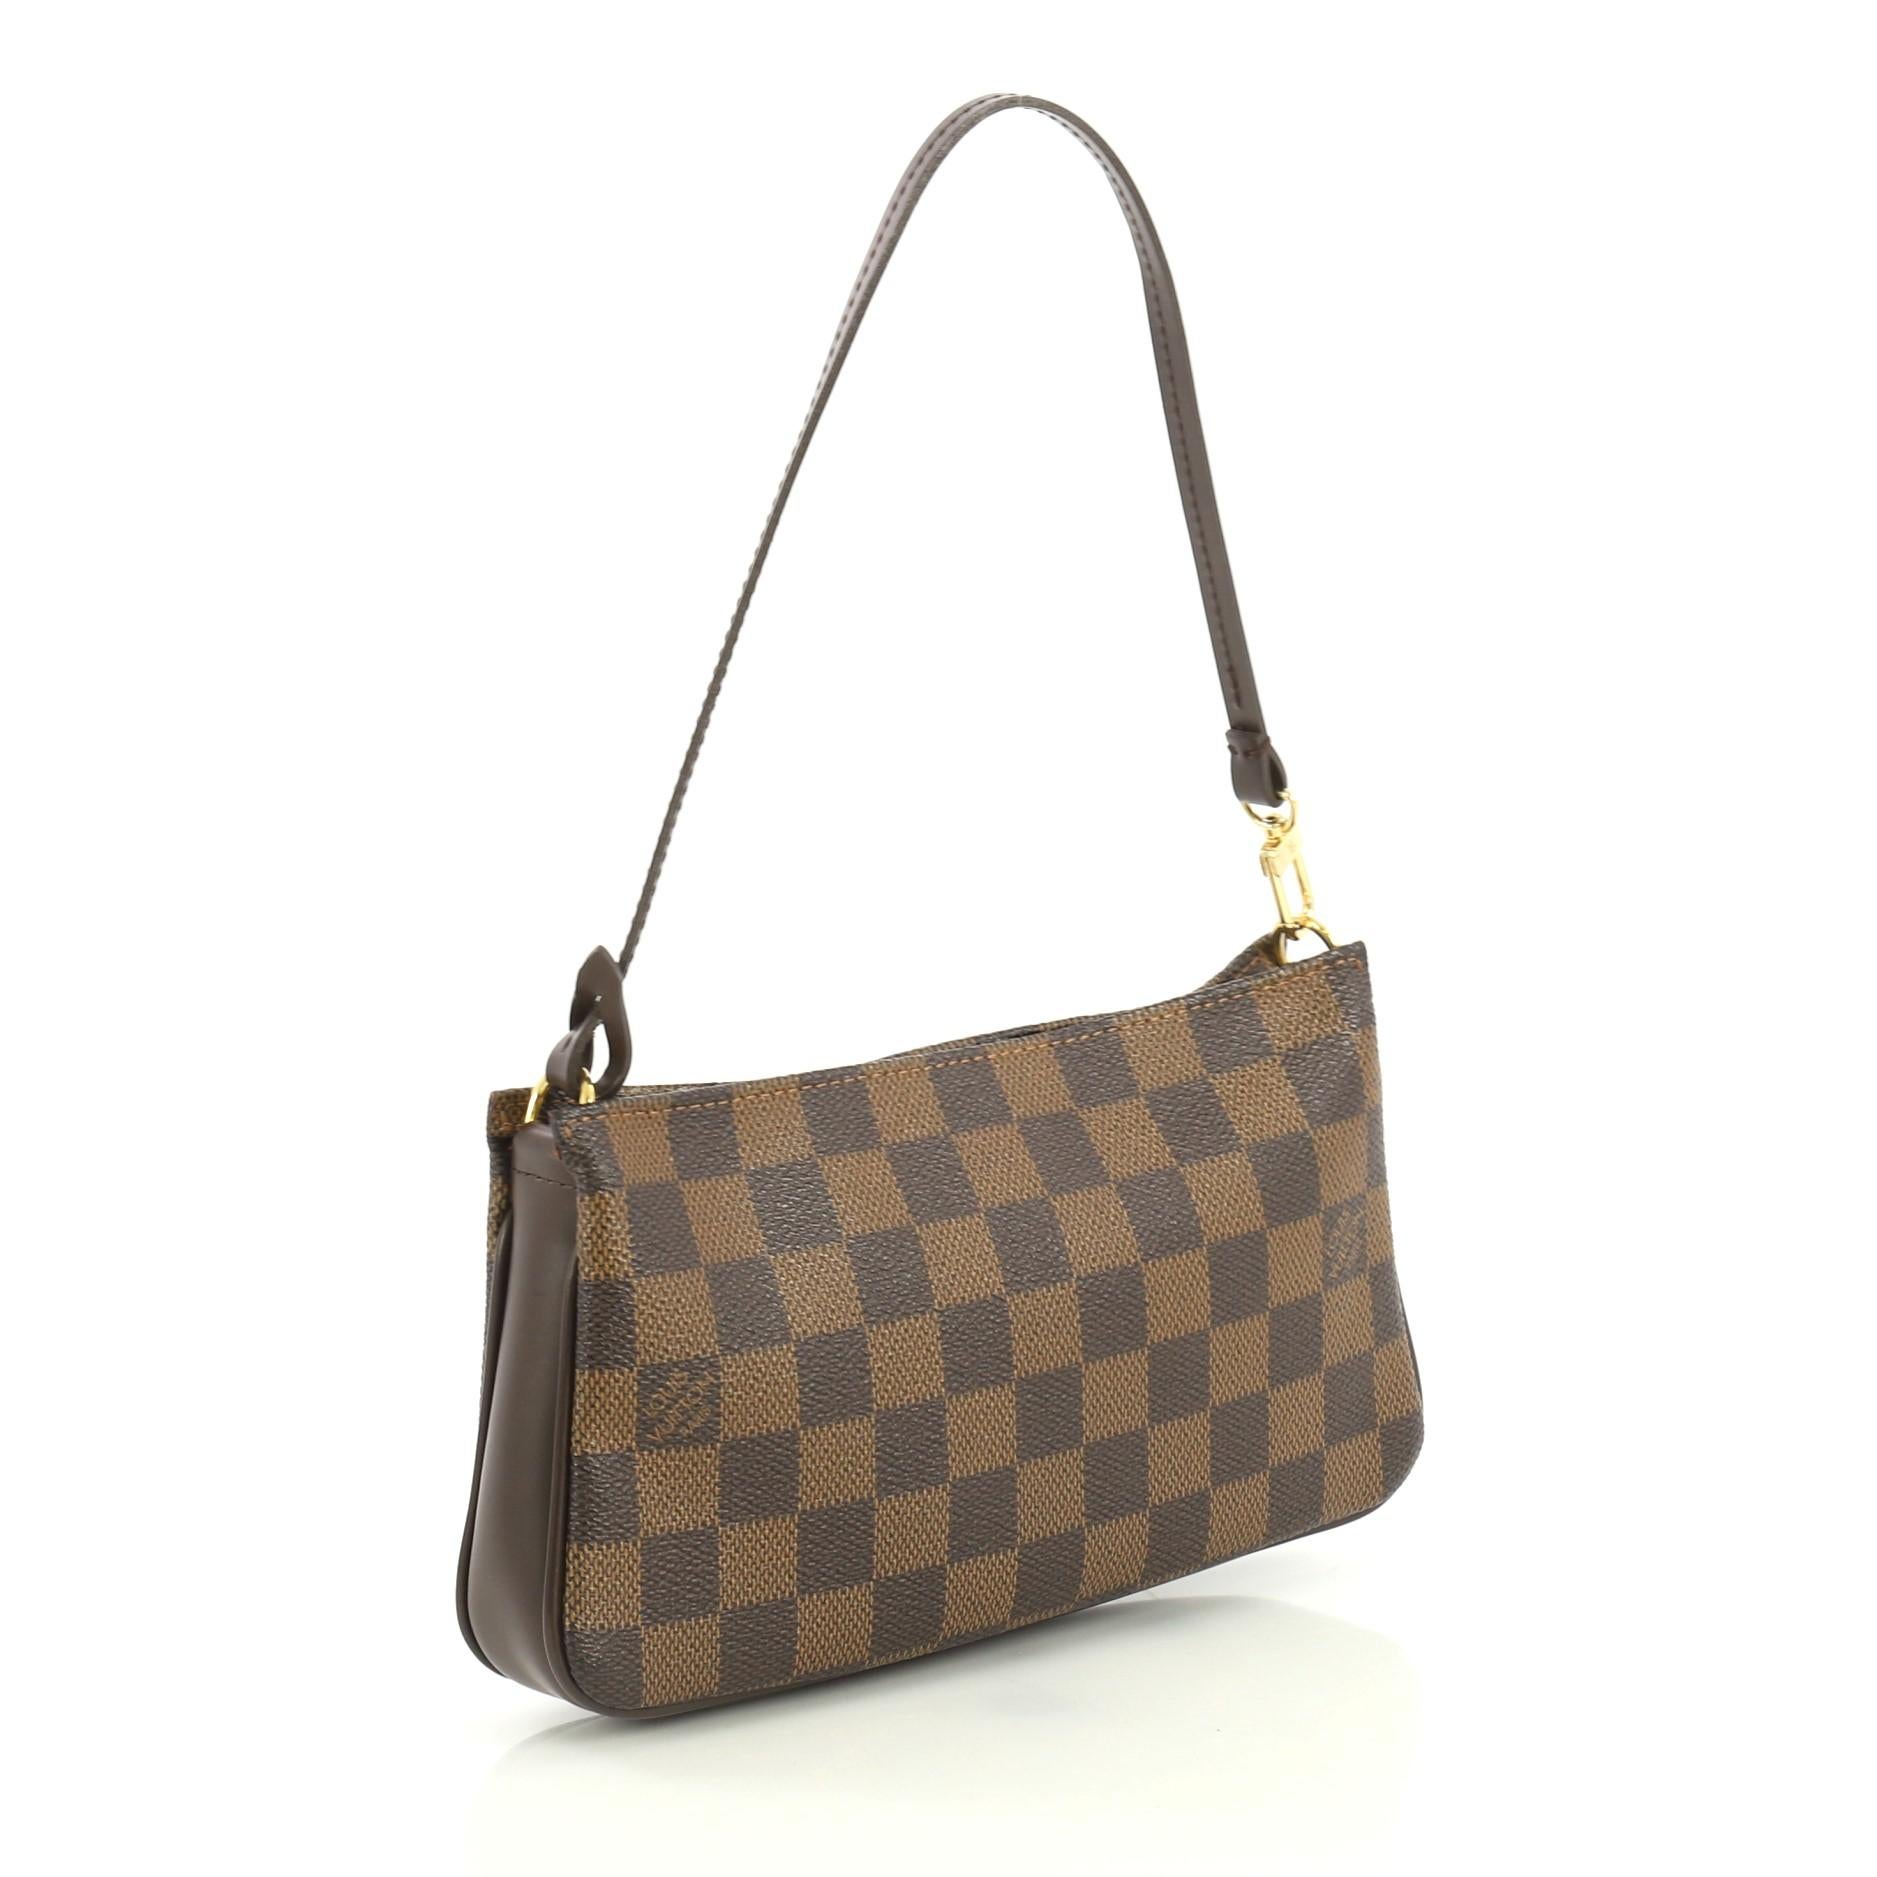 This Louis Vuitton Navona Pochette Accessoires Damier, crafted from damier ebene coated canvas, features a flat leather strap and gold-tone hardware. Its zip closure opens to a red fabric interior. Authenticity code reads: FL0036. 

Condition: